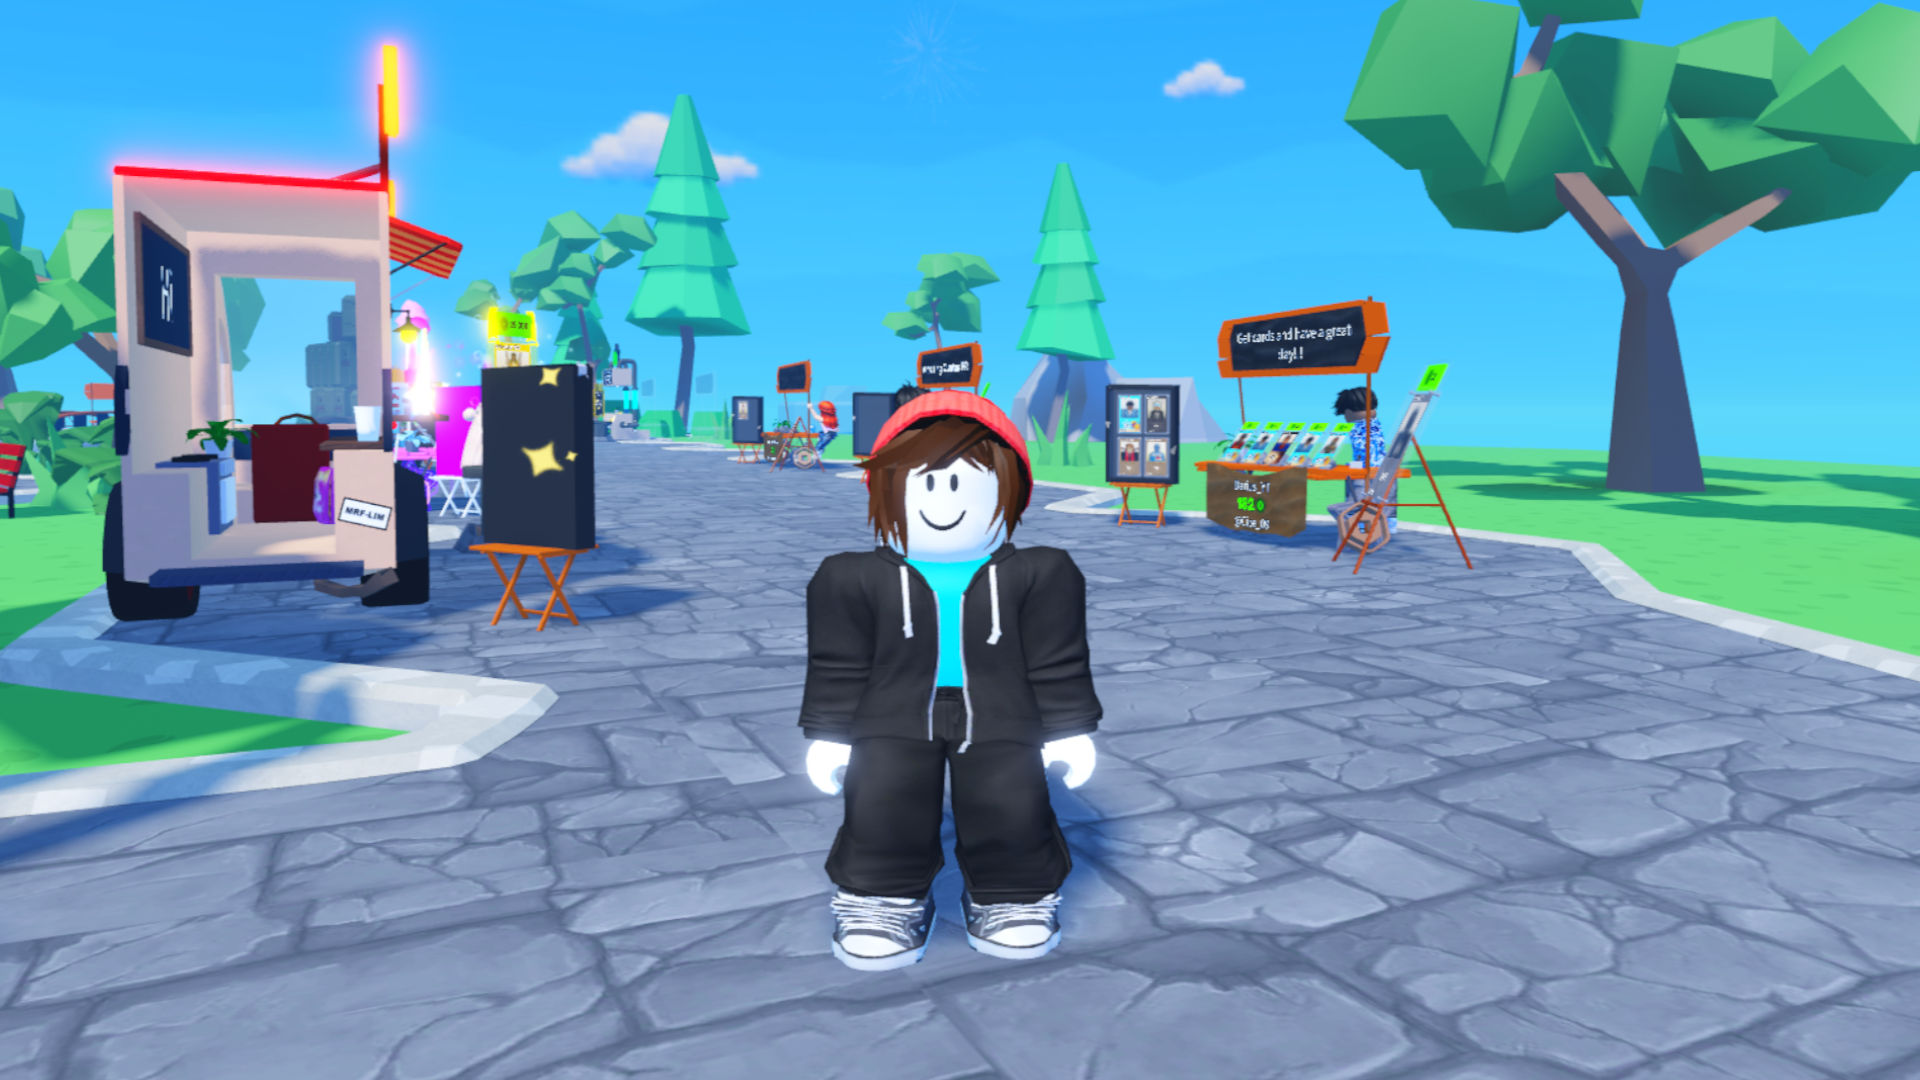 Play Games 2. Earn Coins 3. Redeem Free Robux  New  game:  1. Play Games 2. Earn Coins 3. Redeem Free Robux   New game